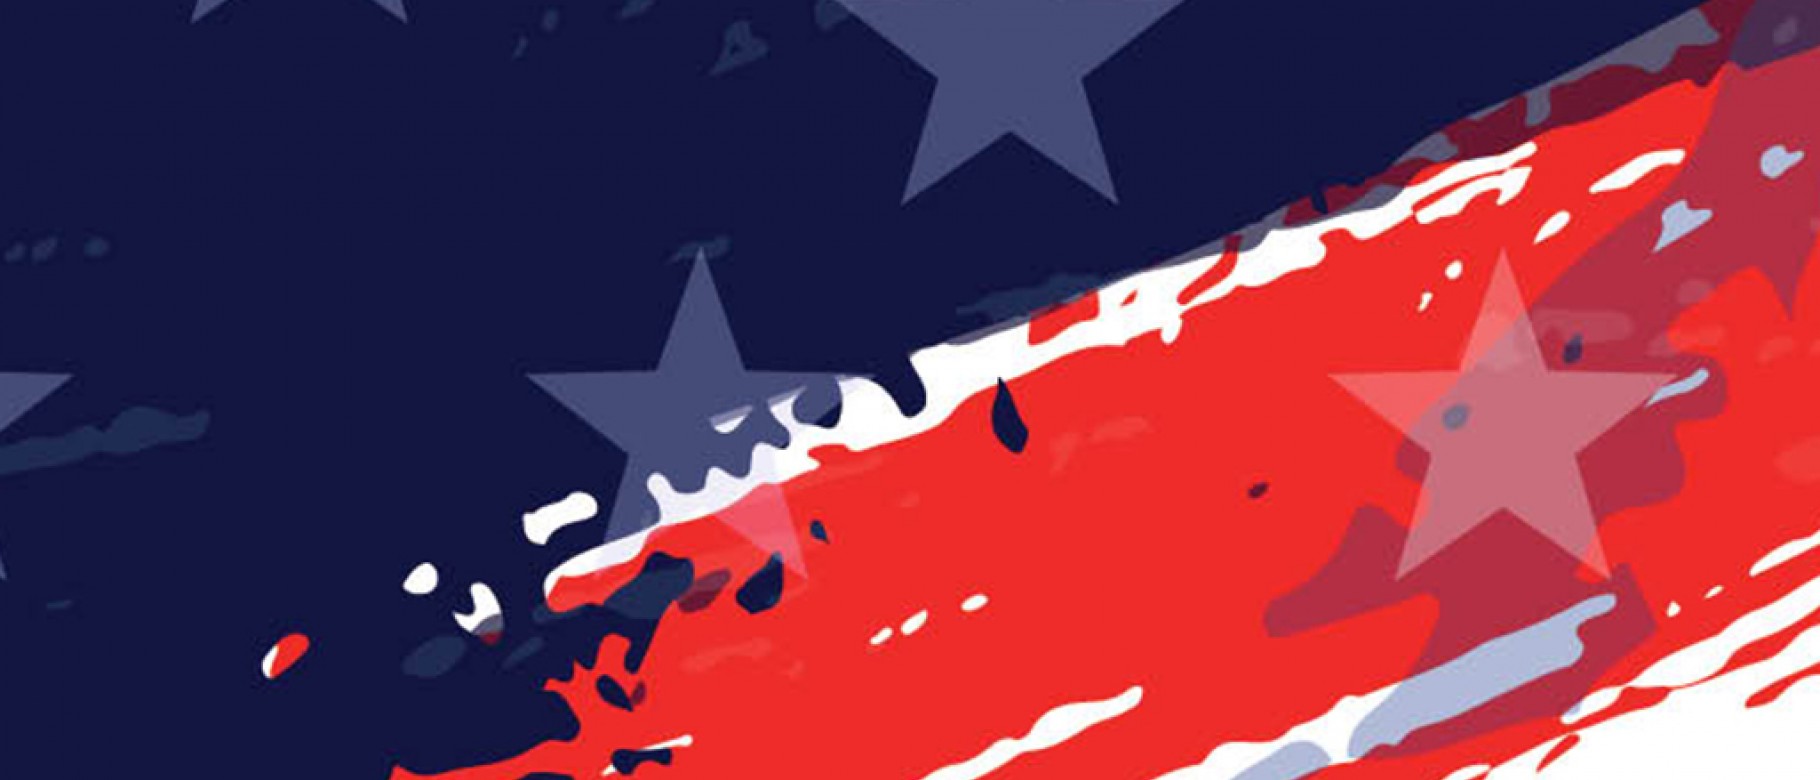 Graphic with red, white and blue stripes and white stars